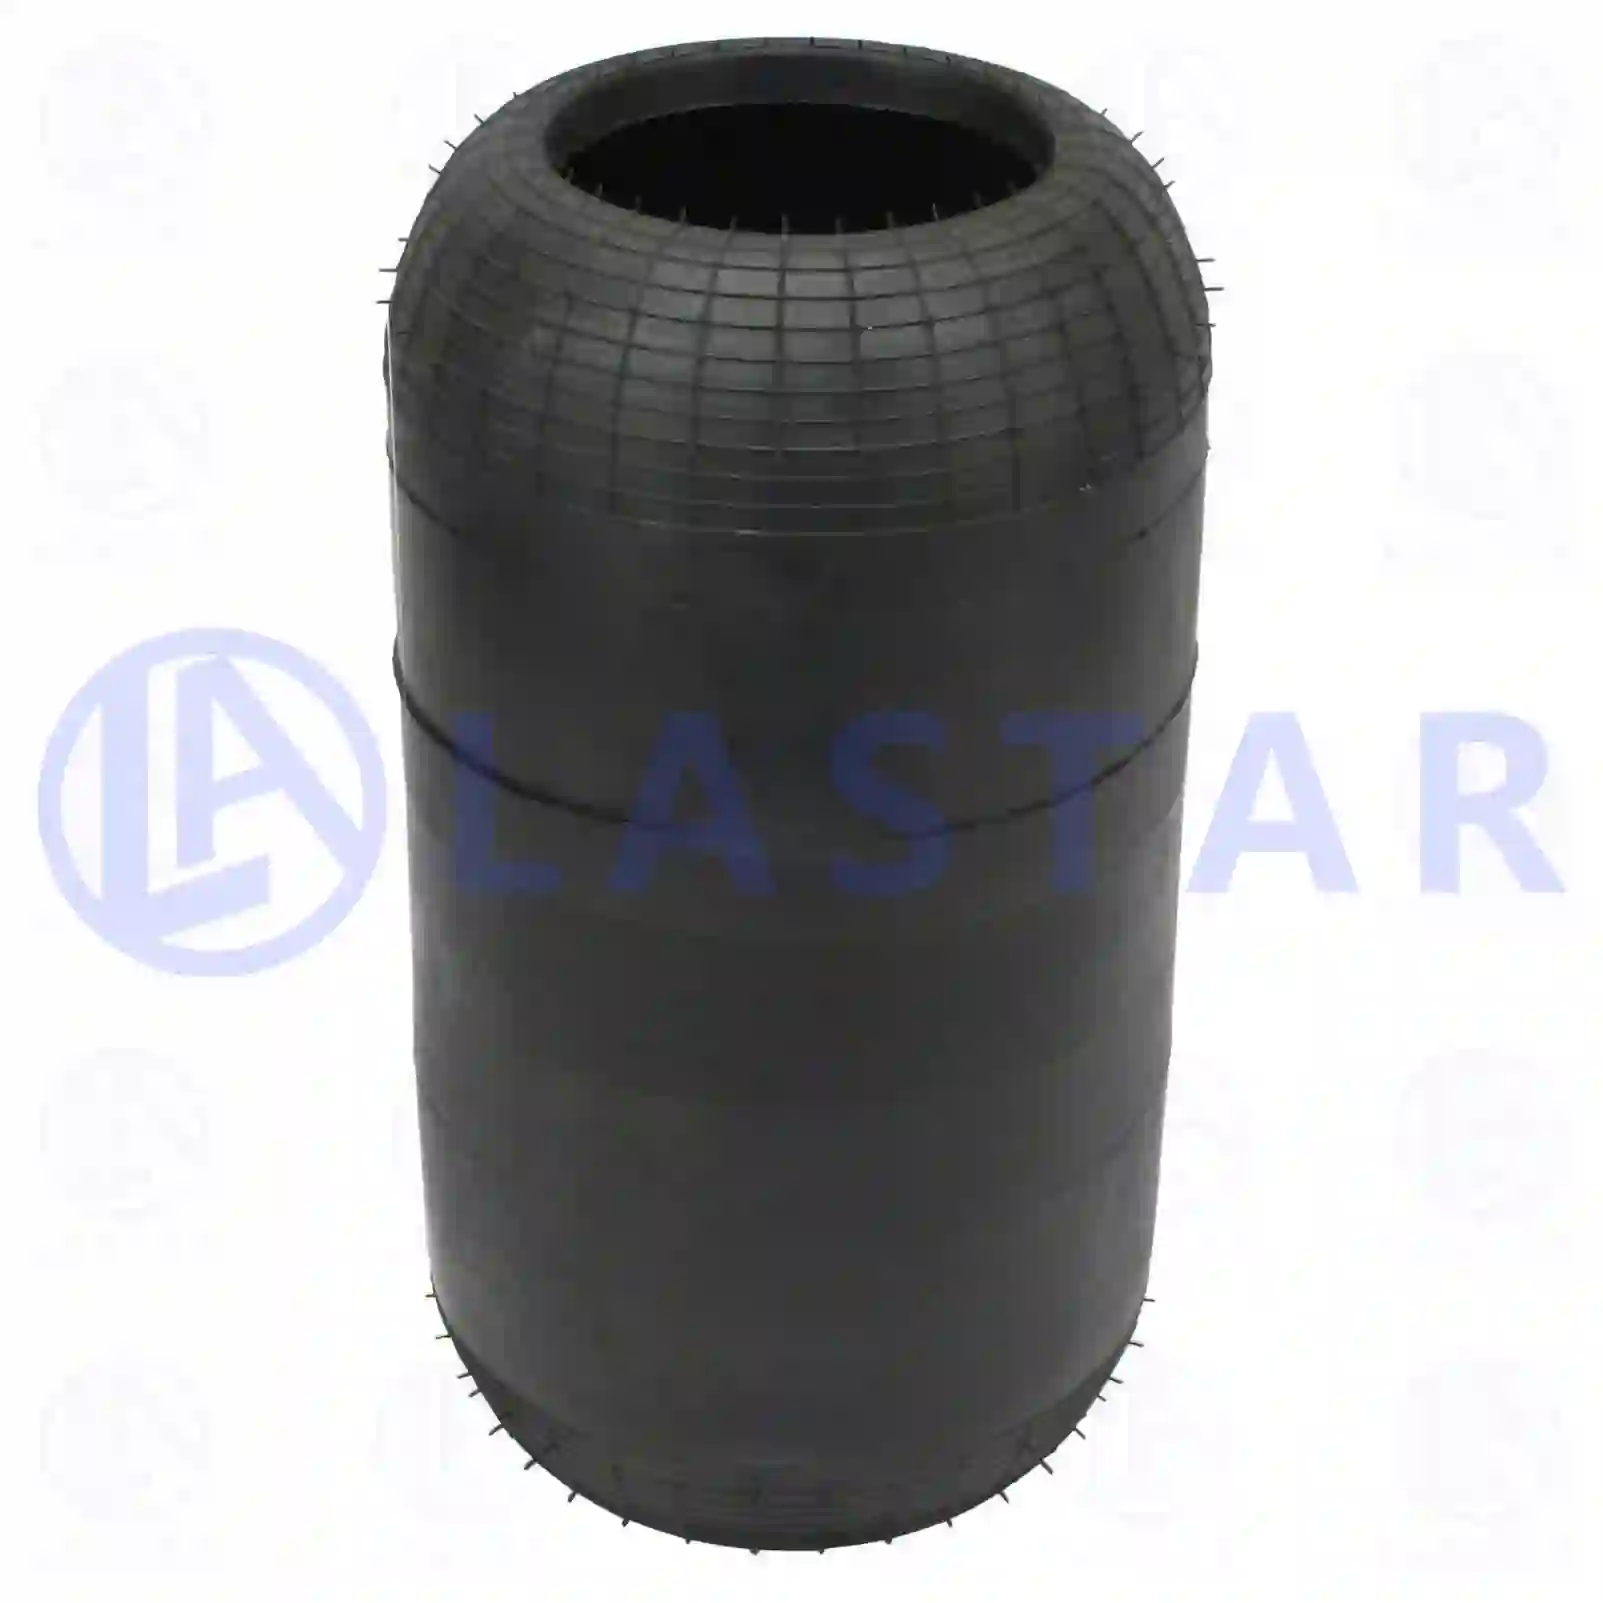 Air Bellow Air spring, without piston, la no: 77728498 ,  oem no:0638148, 1322717, 638148, 0196043, 196043, 196043, 700196043, 81436010056, 81436010057, 81436010058, 81436010076, 81436010079, 81436010082, 81436010084, 81436010091, 81436010114, 81436010116, 81436010118, 3073280001, 3073280101, MLF7003, 1134446, 1135446 Lastar Spare Part | Truck Spare Parts, Auotomotive Spare Parts